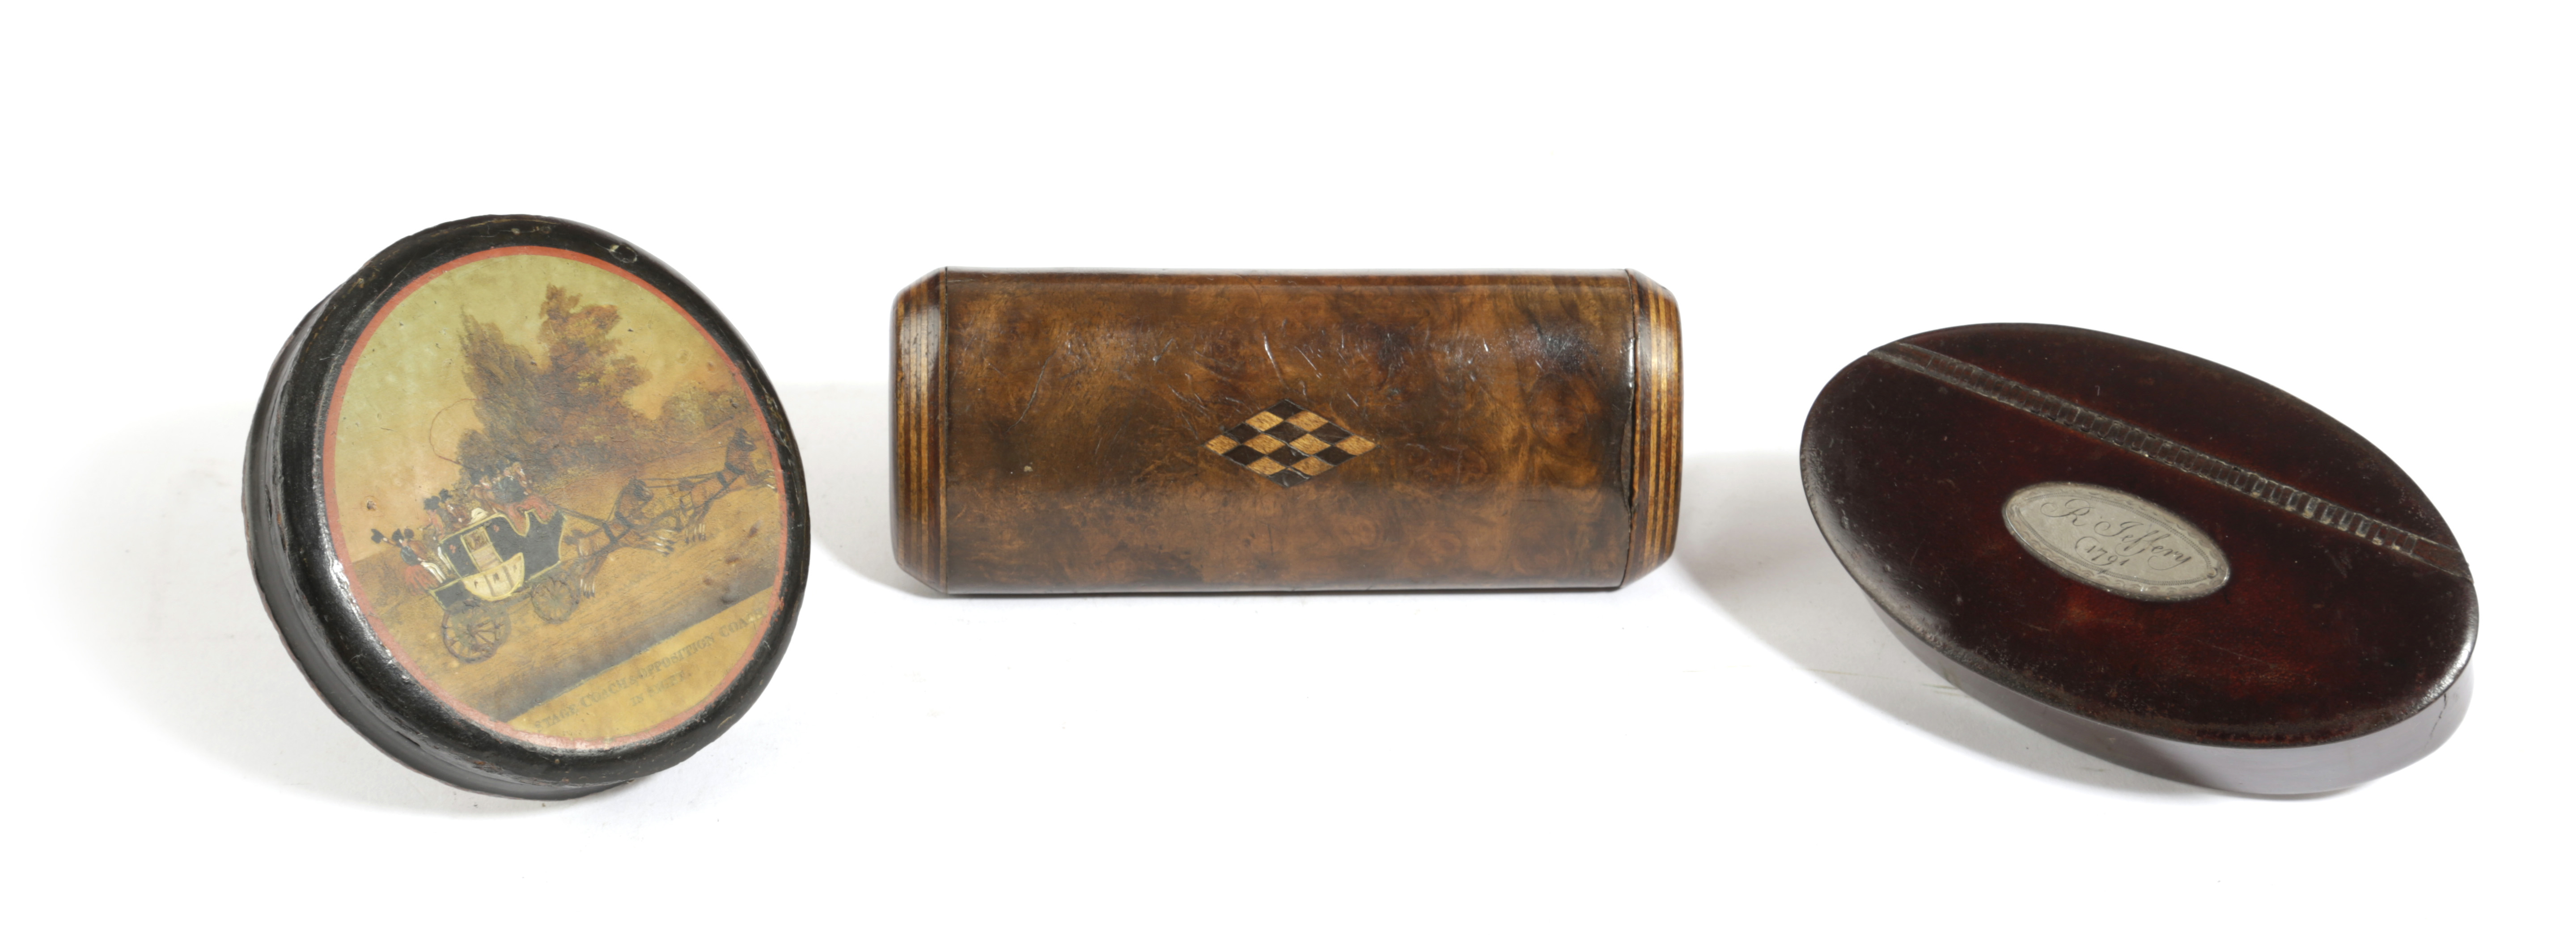 A GEORGE III LACQUERED WOOD SNUFF BOX DATED '1791' of navette shape, the hinged lid with a silver